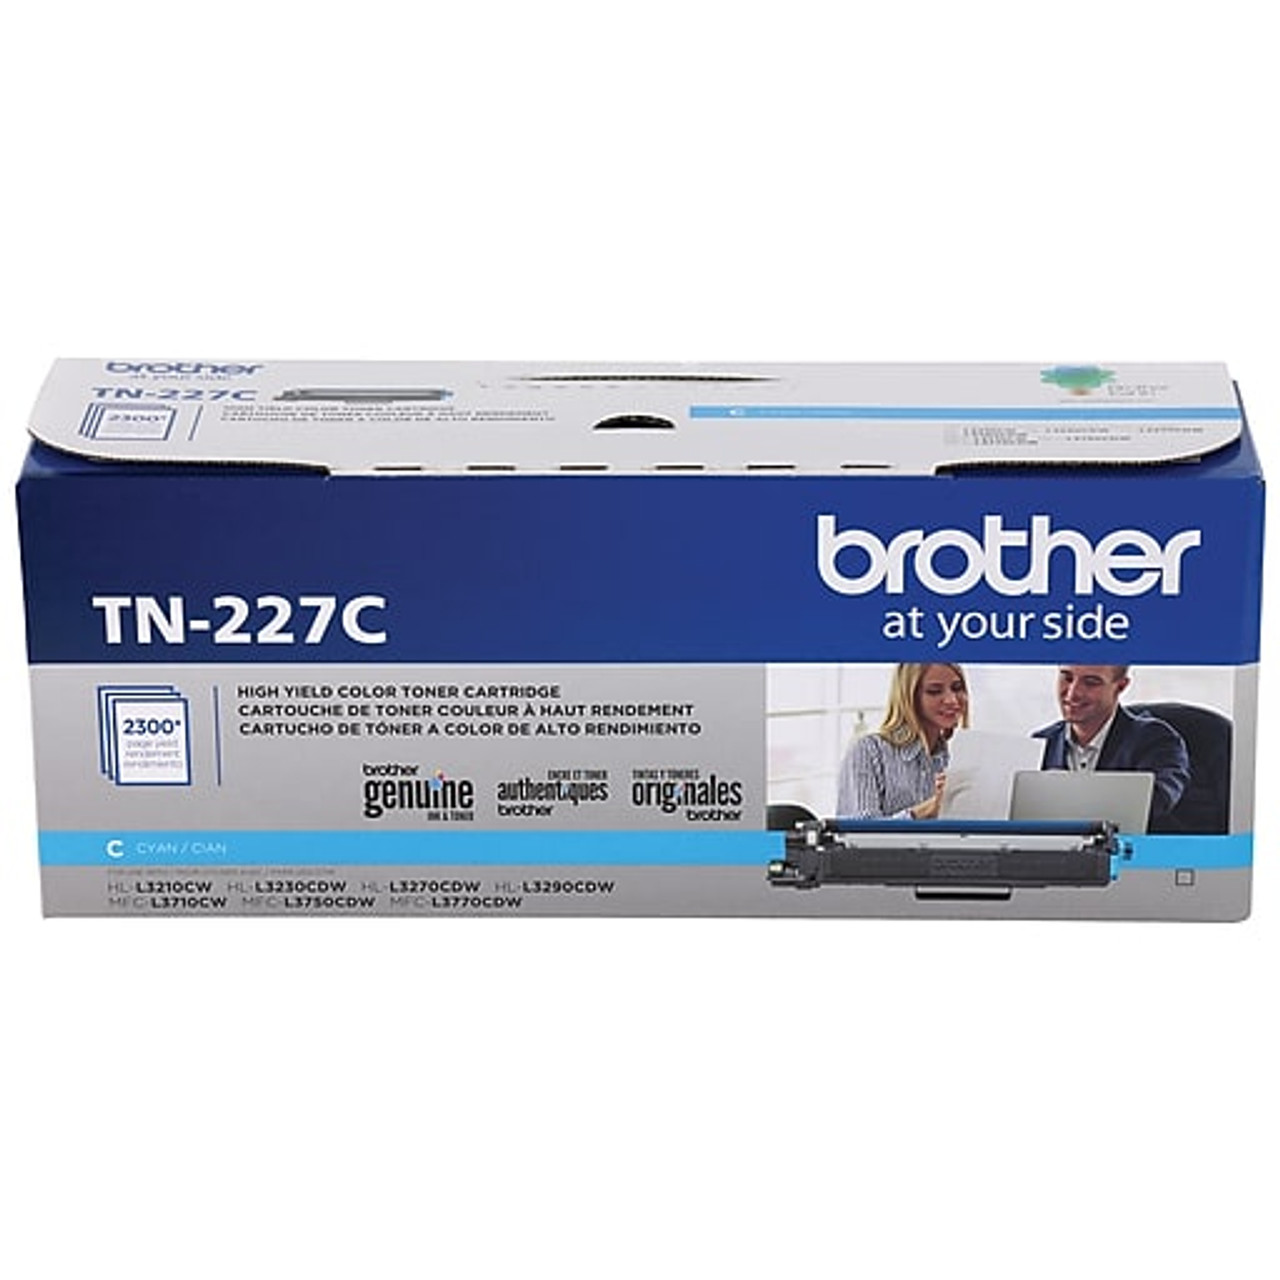 Compatible Cyan High Yield Toner Cartridge for use in Brother HL-L3210CW